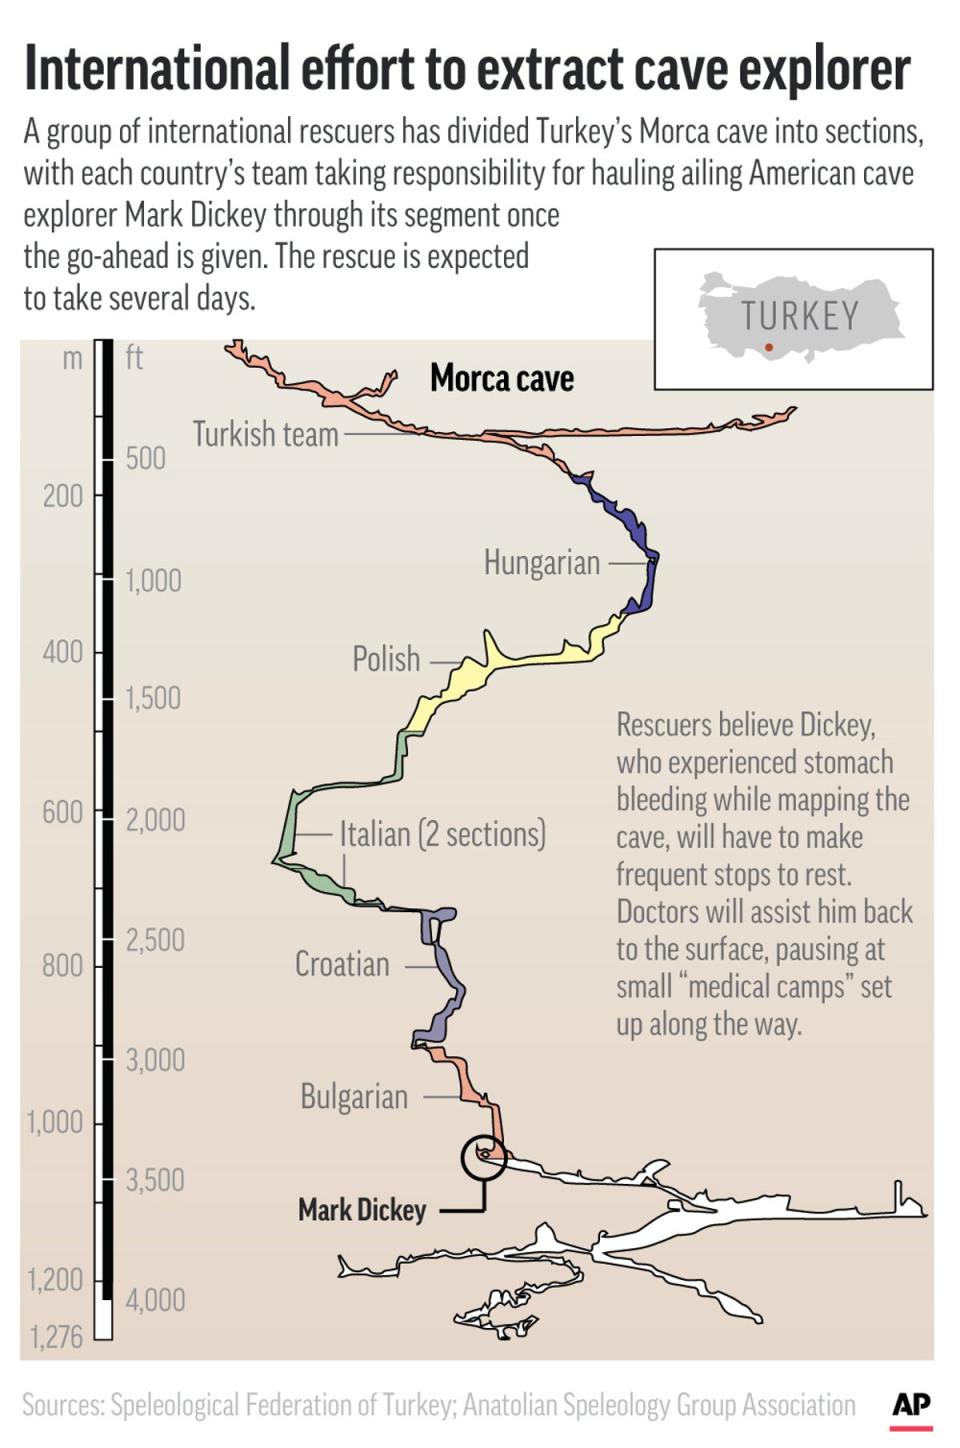 Cave rescue teams from several European countries conducted a extraction effort to rescue Dickey ((AP Graphic))